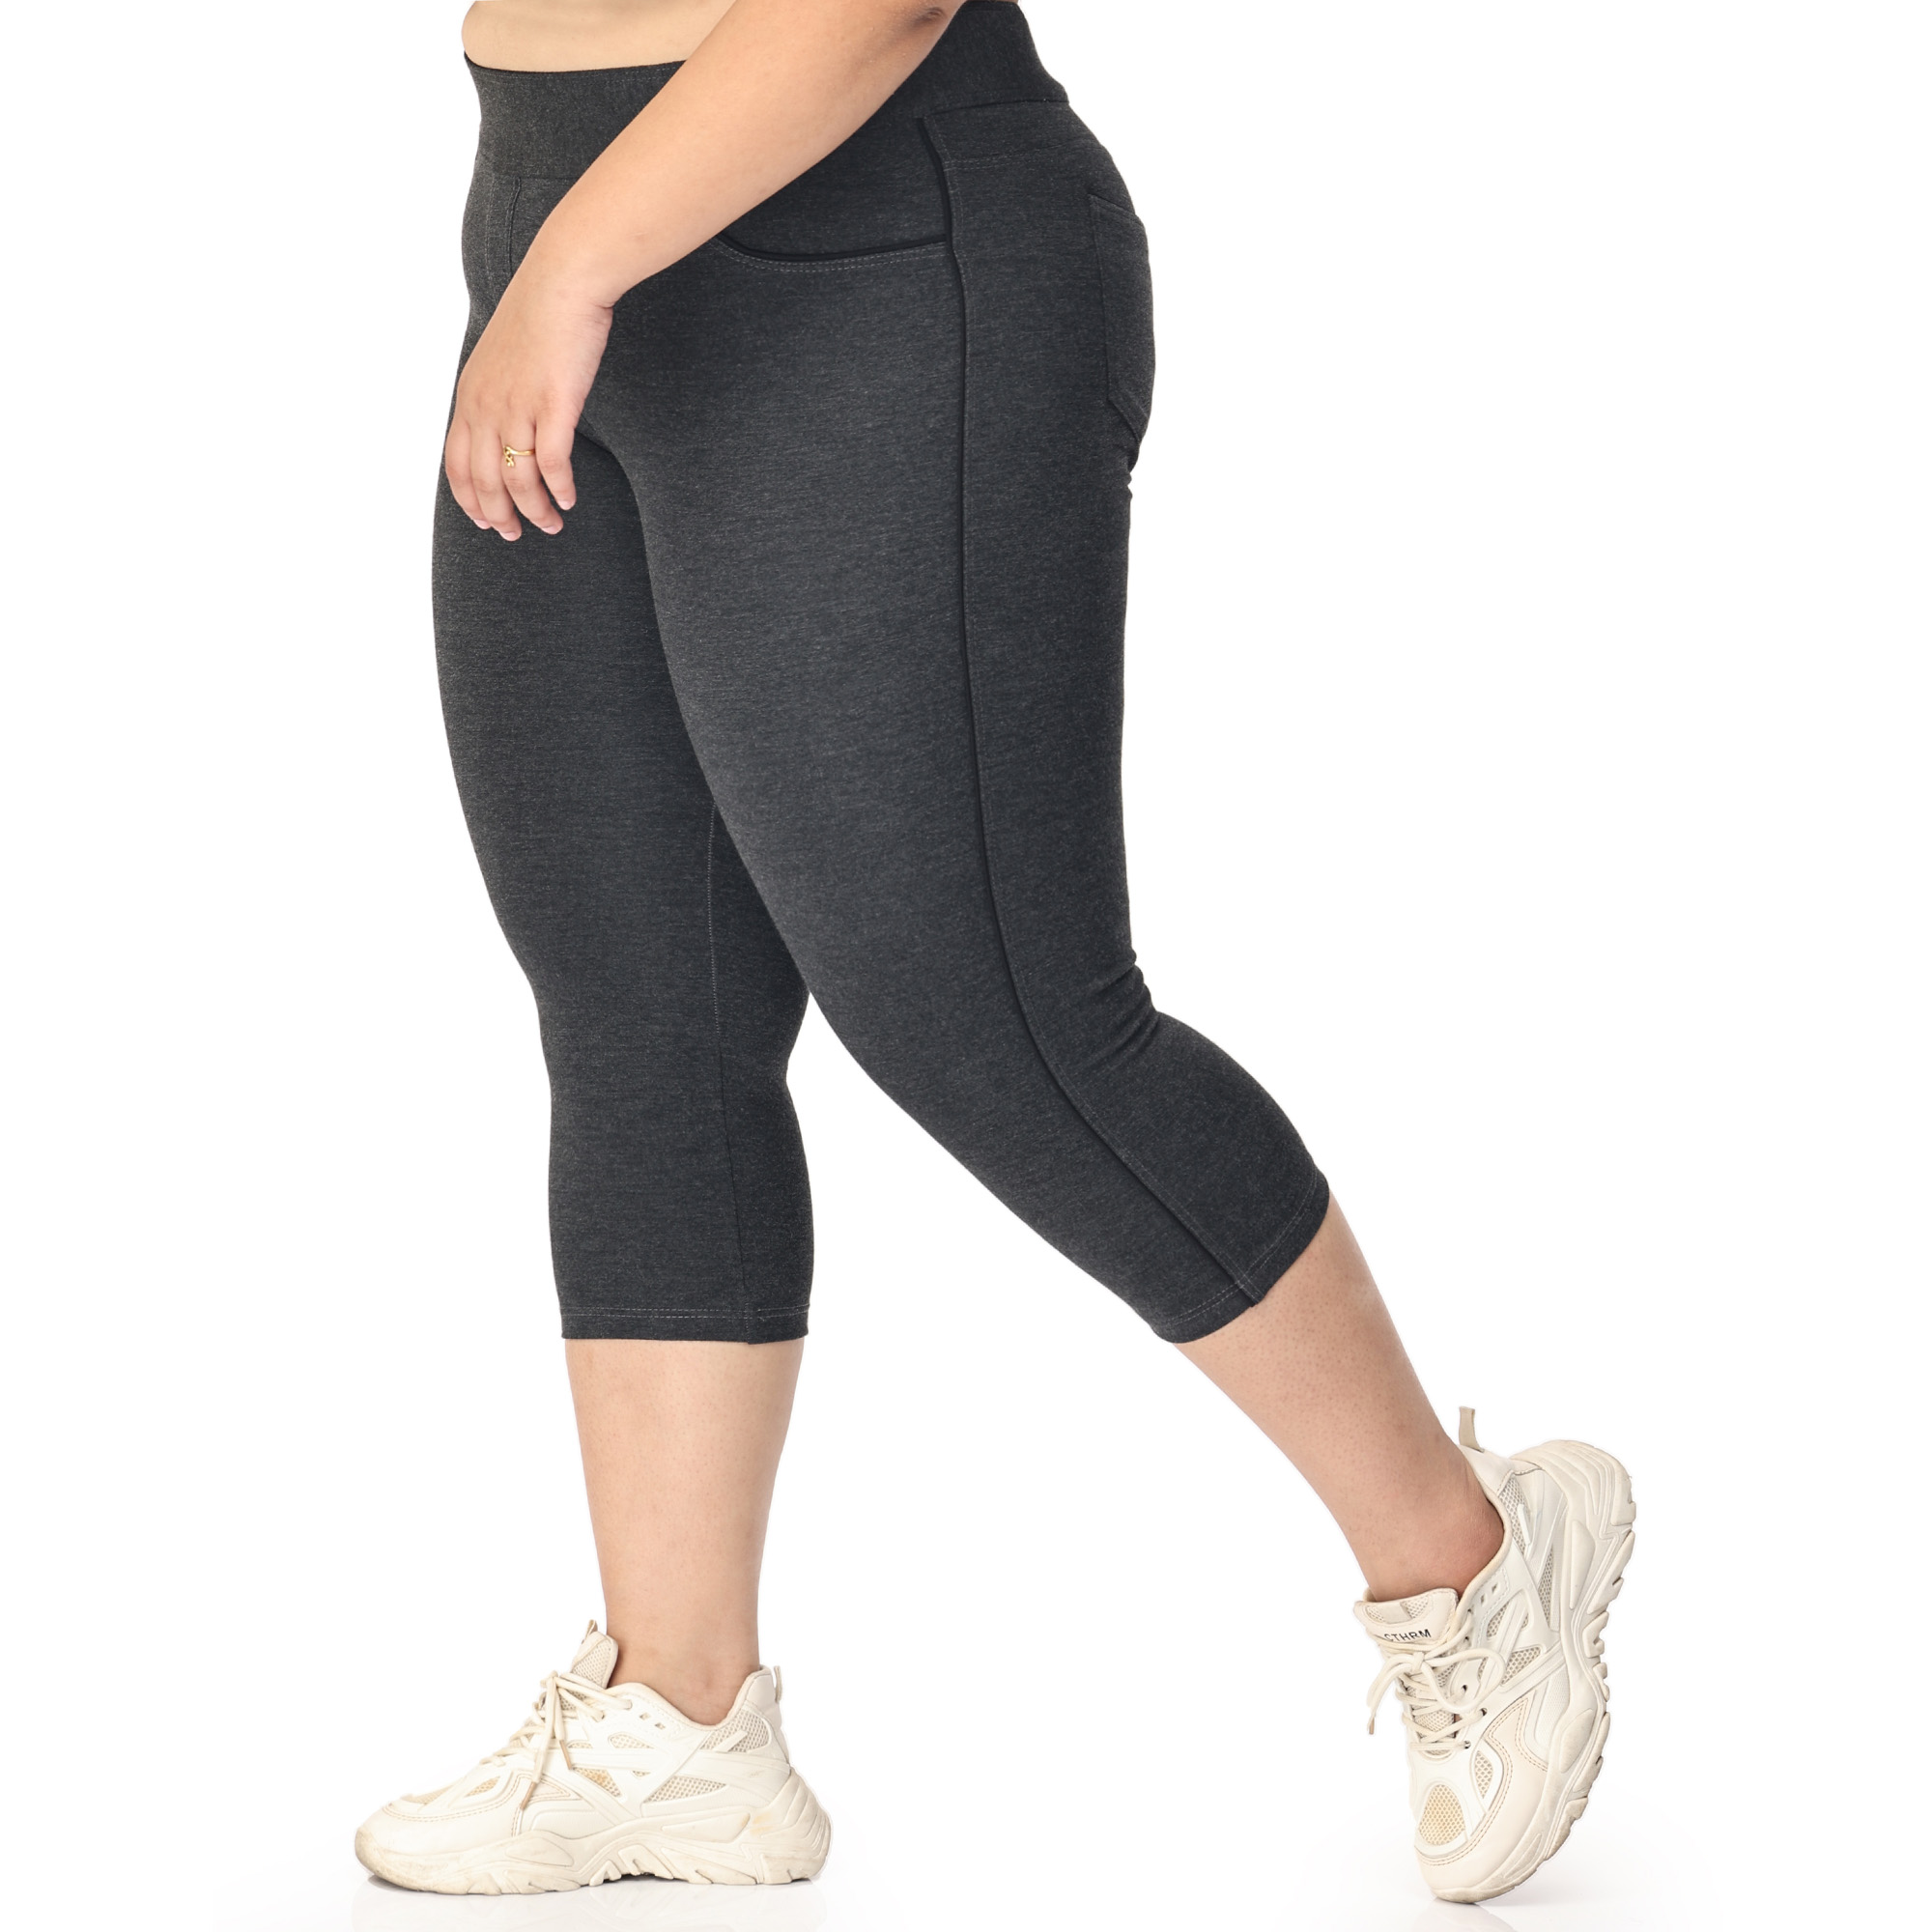 Charcoal grey capris with piping women gym wear Low rise - Belore